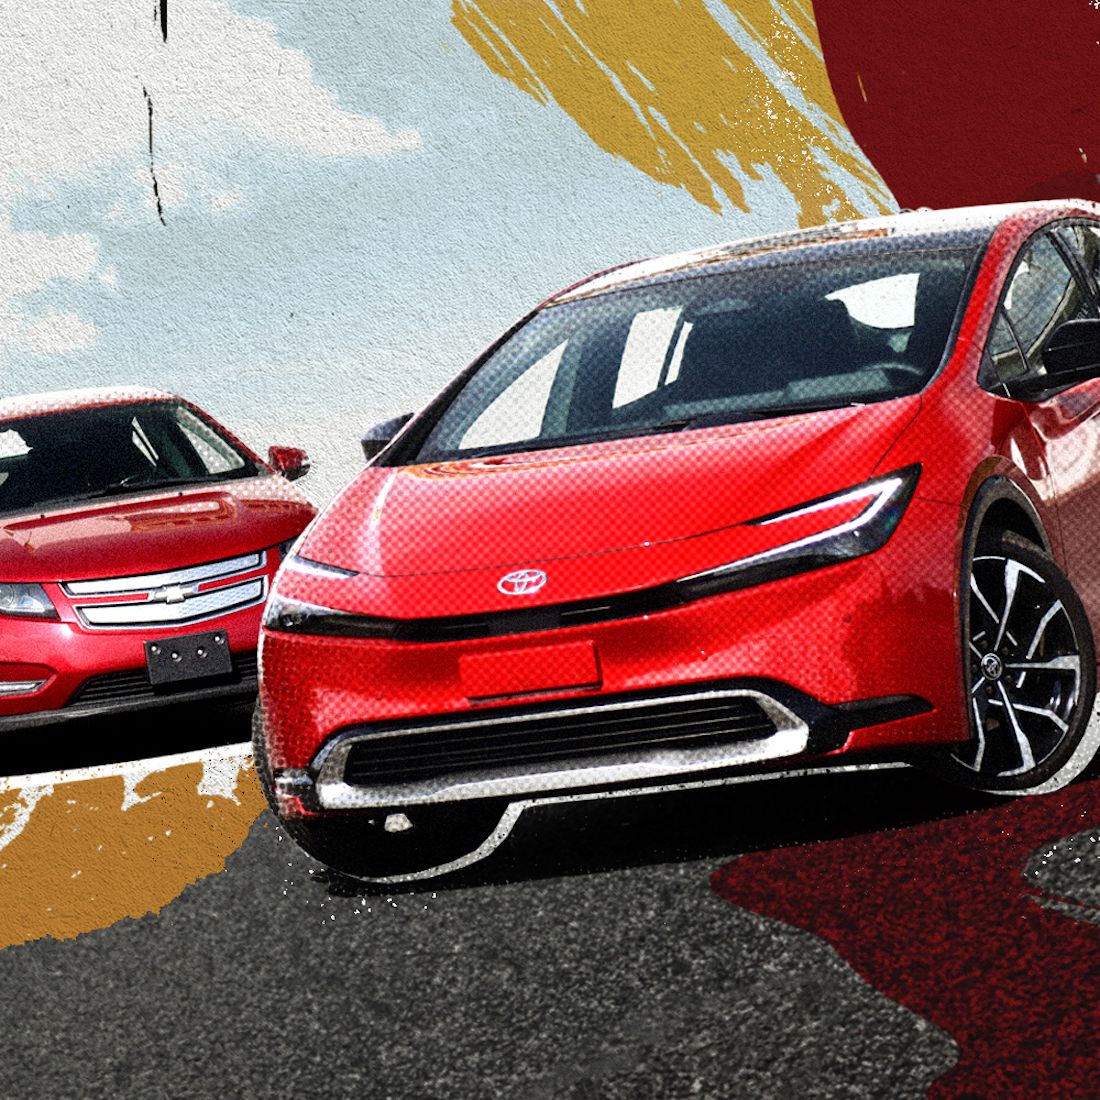 How Does the Original Chevy Volt Hold Up Against the New Toyota Prius?